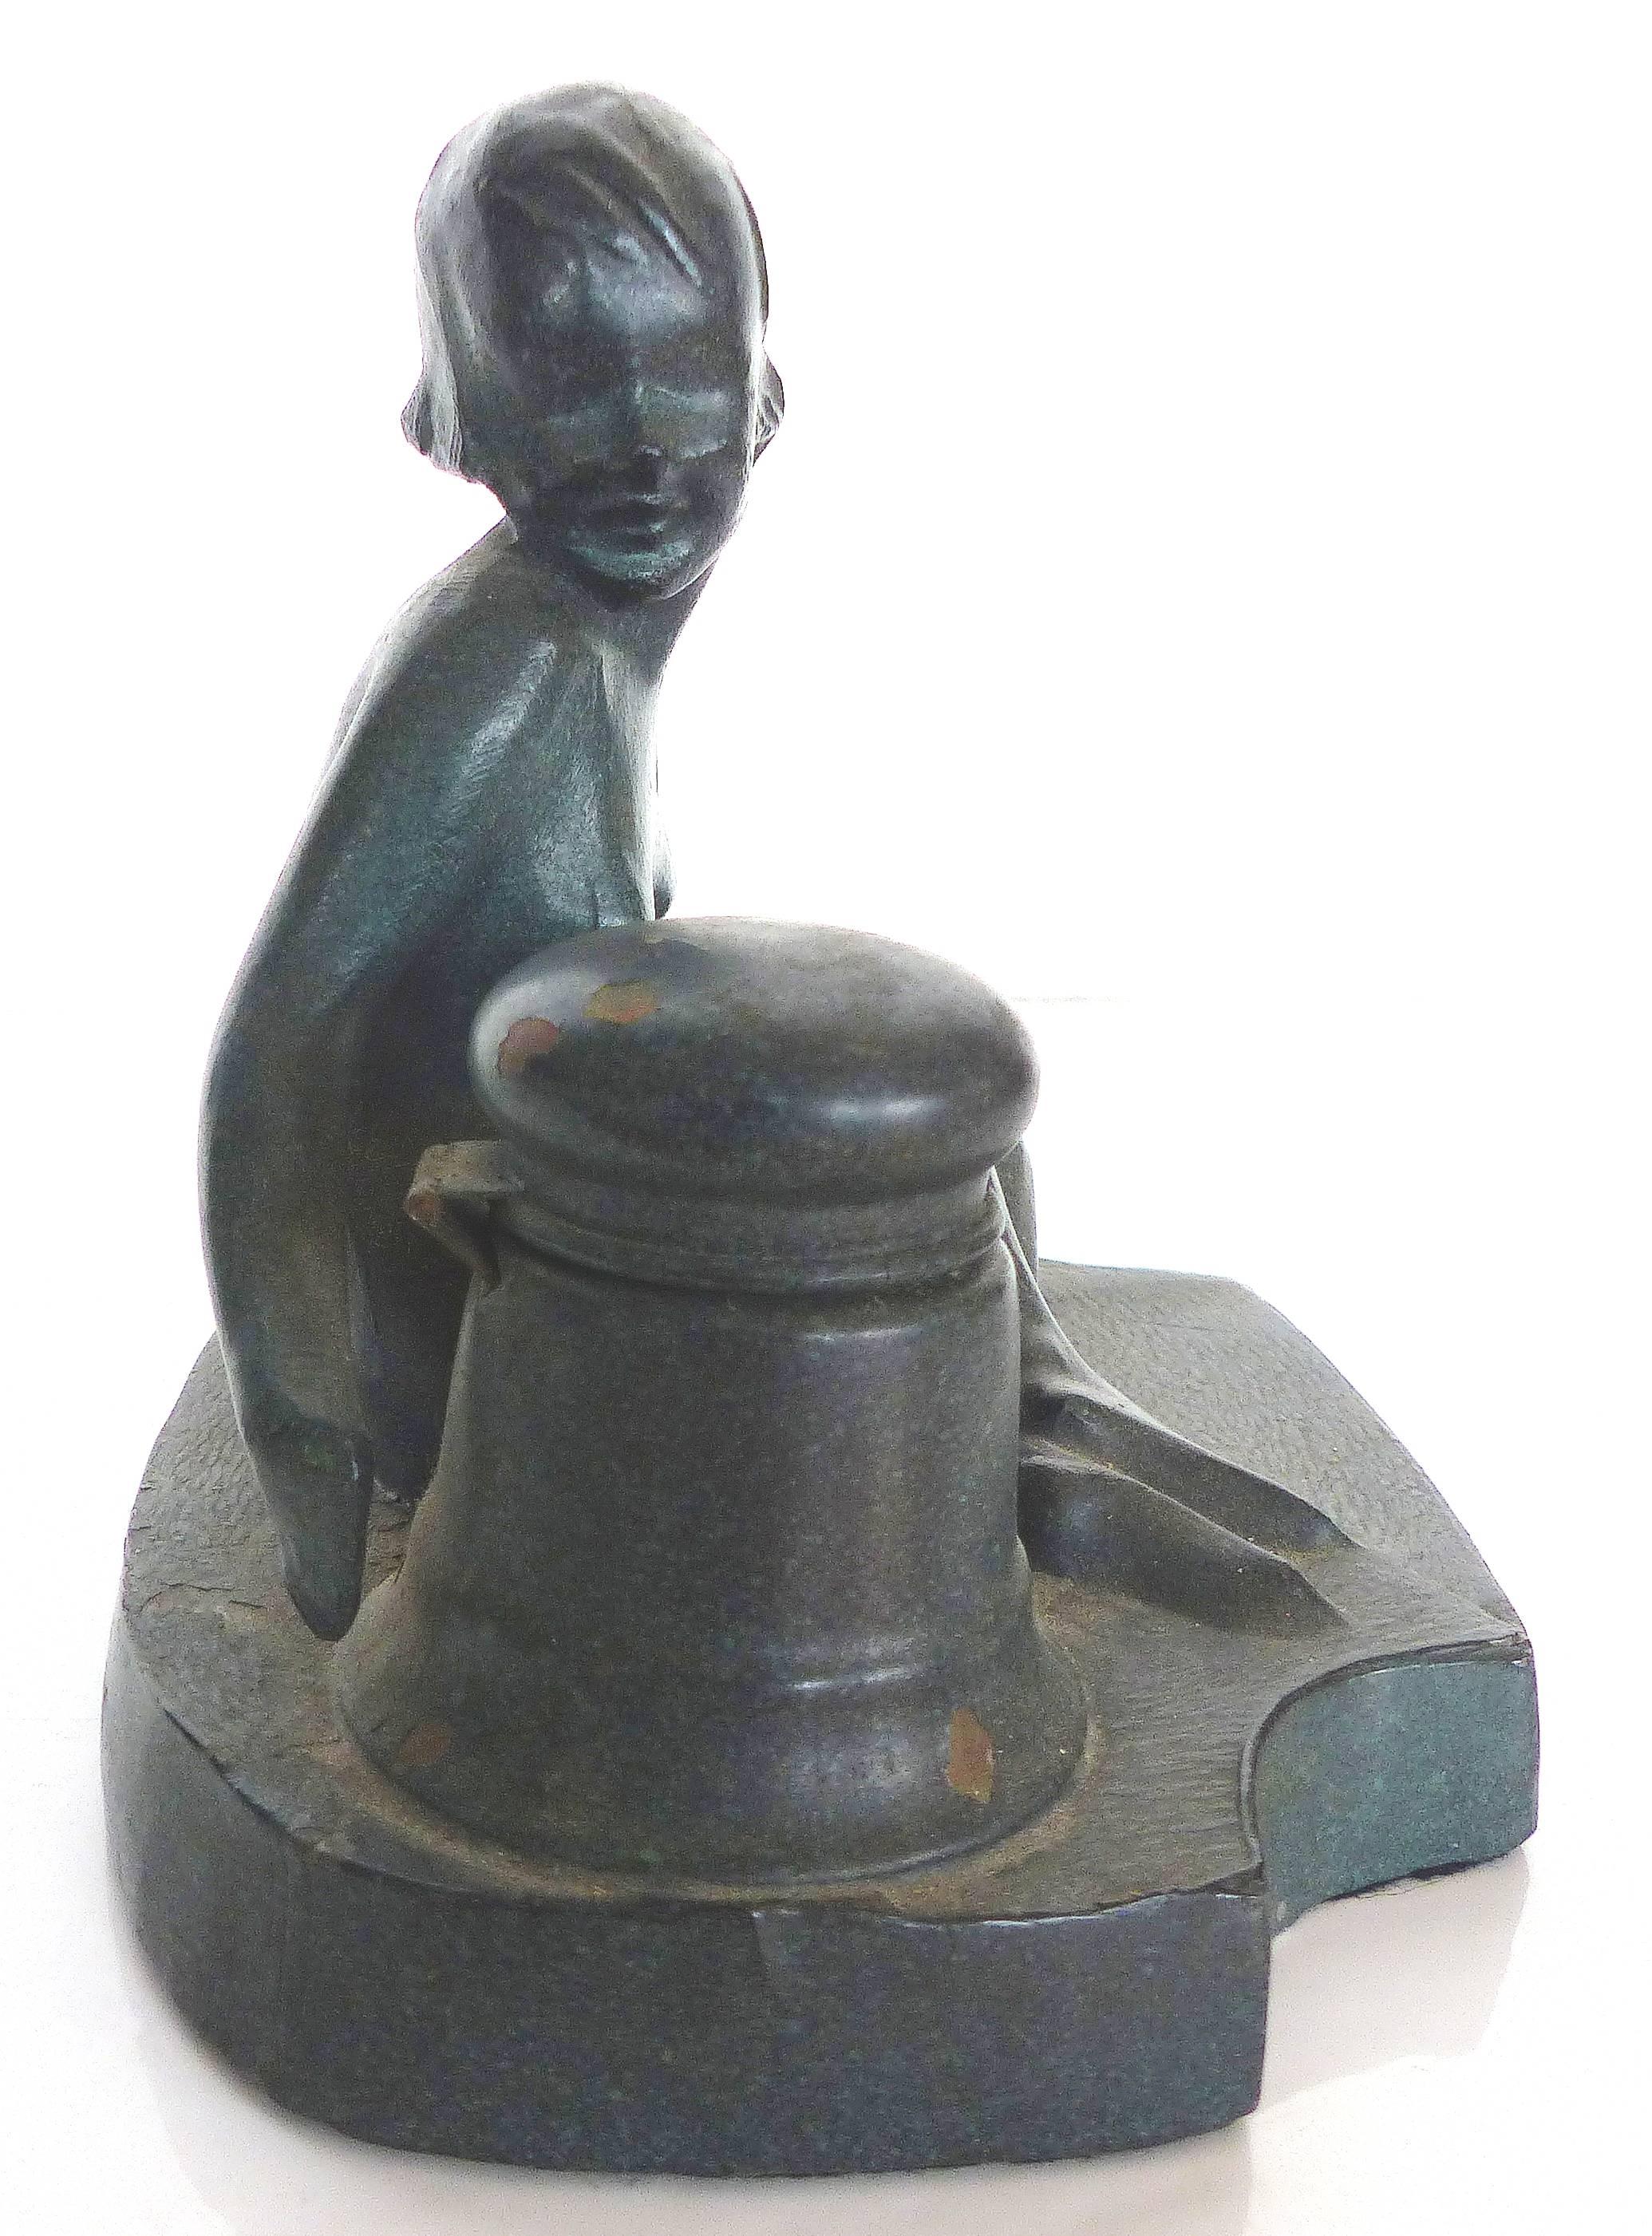 Art Deco Frankart Figural Lady Inkwell

This very rare American Art Deco figural inkwell and pen holder was designed in the early 1920s by sculptor Arthur von Frankenberg (1898-1992) for his company 